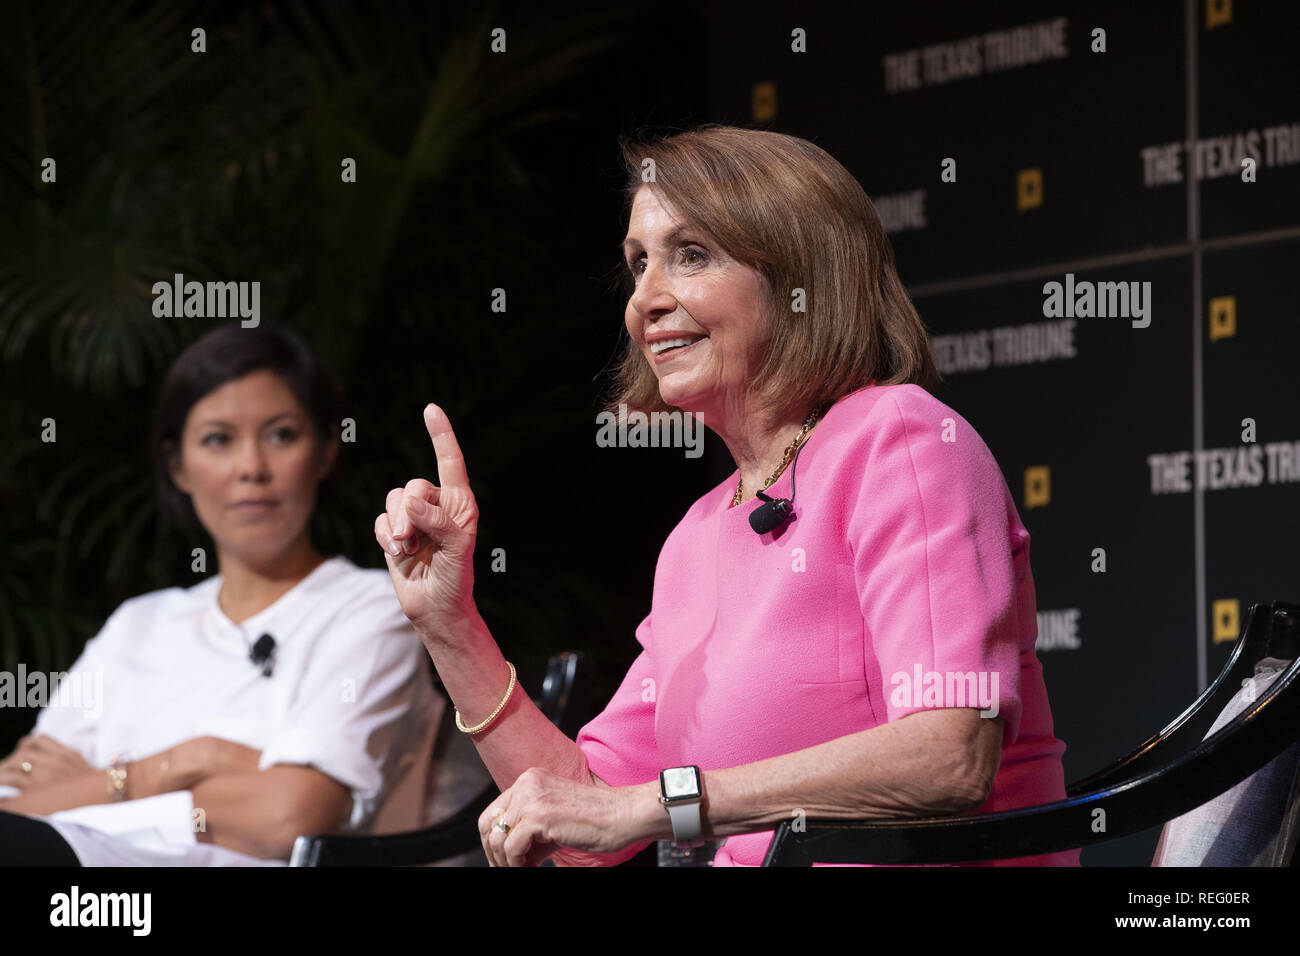 Austin, Texas, USA. 29th Sep, 2018. House Democratic leader Nancy Pelosi appears as a featured guest with interviewer Alex Wagner at the 2018 Texas Tribune Festival on Sept. 29, 2018. Pelosi has since been elected Speaker of the U.S. House of Representatives Credit: Bob Daemmrich/ZUMA Wire/Alamy Live News Stock Photo